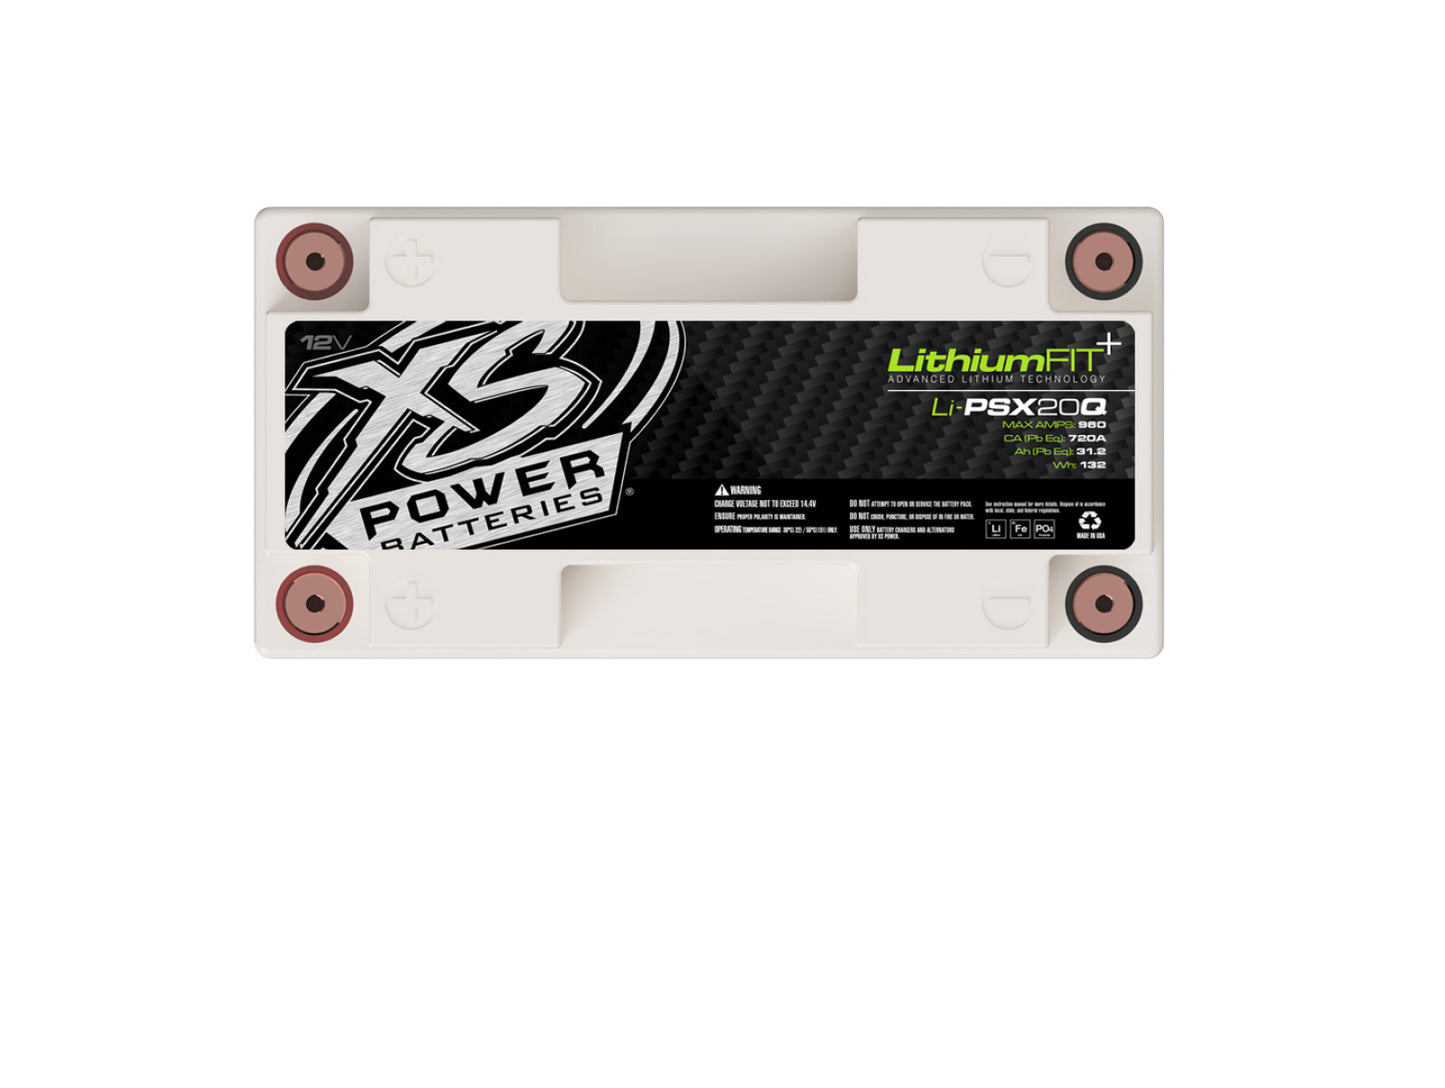 XS Power Batteries Lithium Powersports Series Batteries - M6 Terminal Bolts Included 960 Max Amps